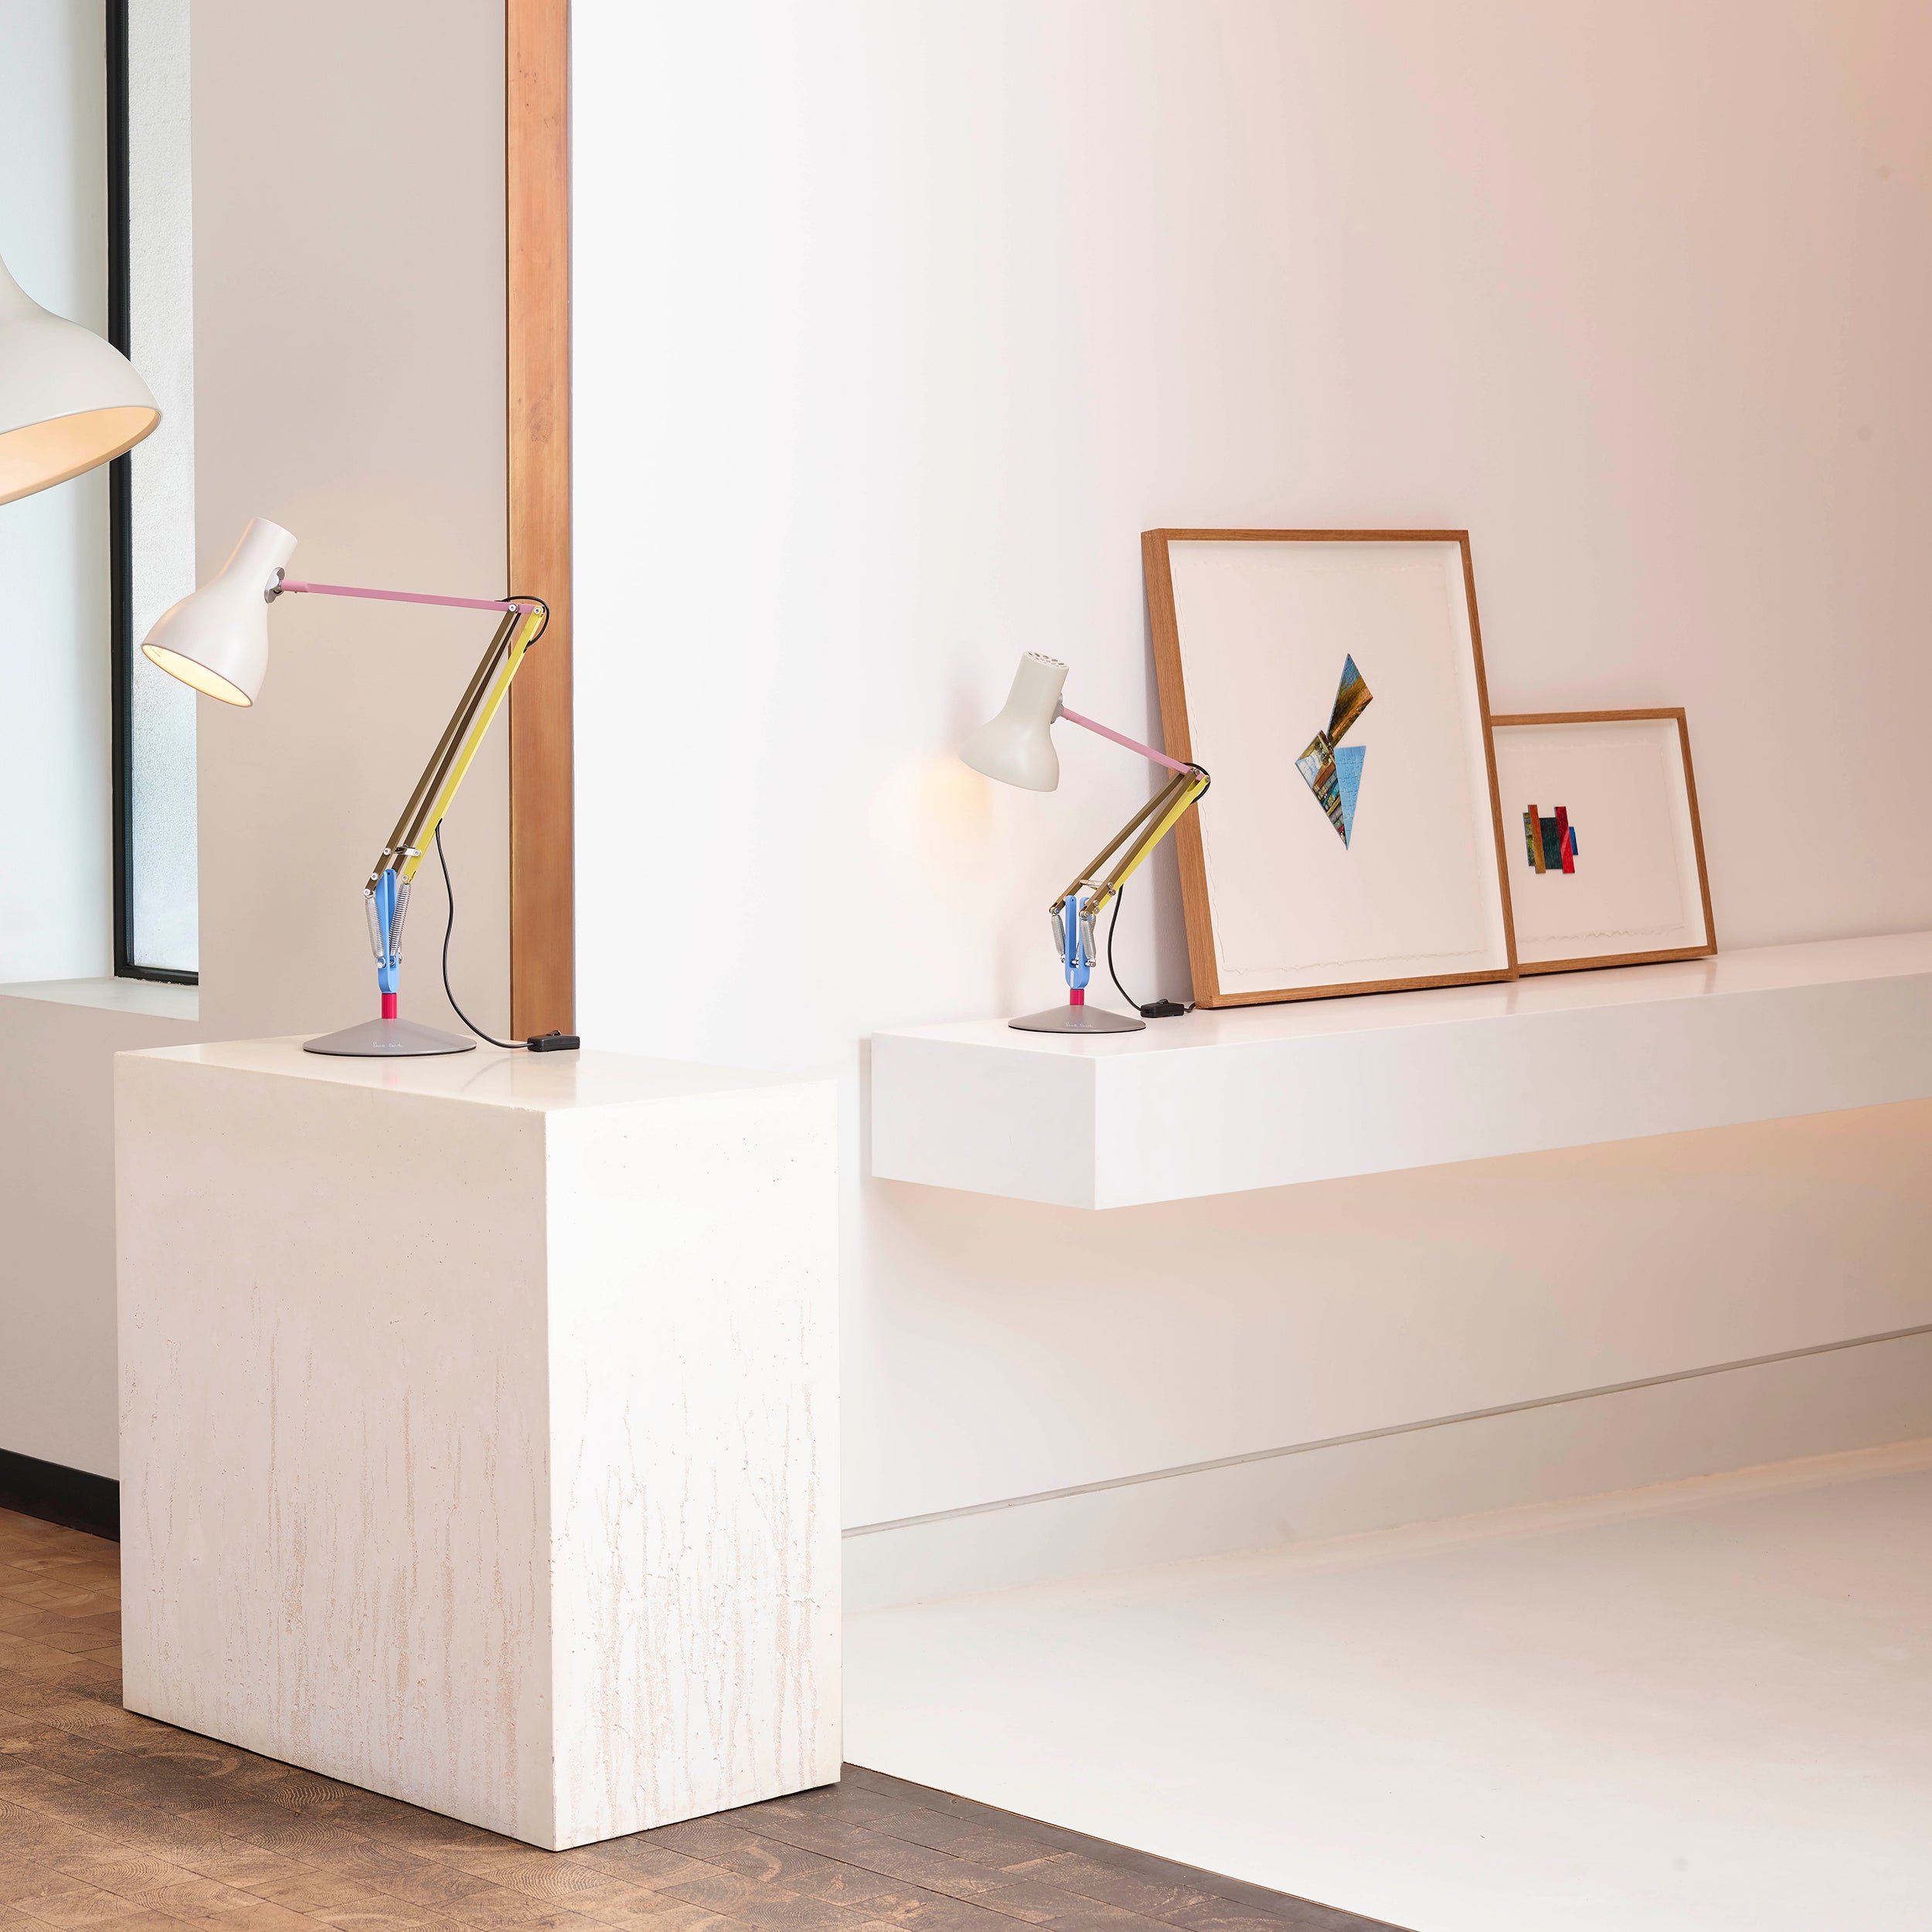 Type 75 Desk Lamp: Paul Smith Edition One